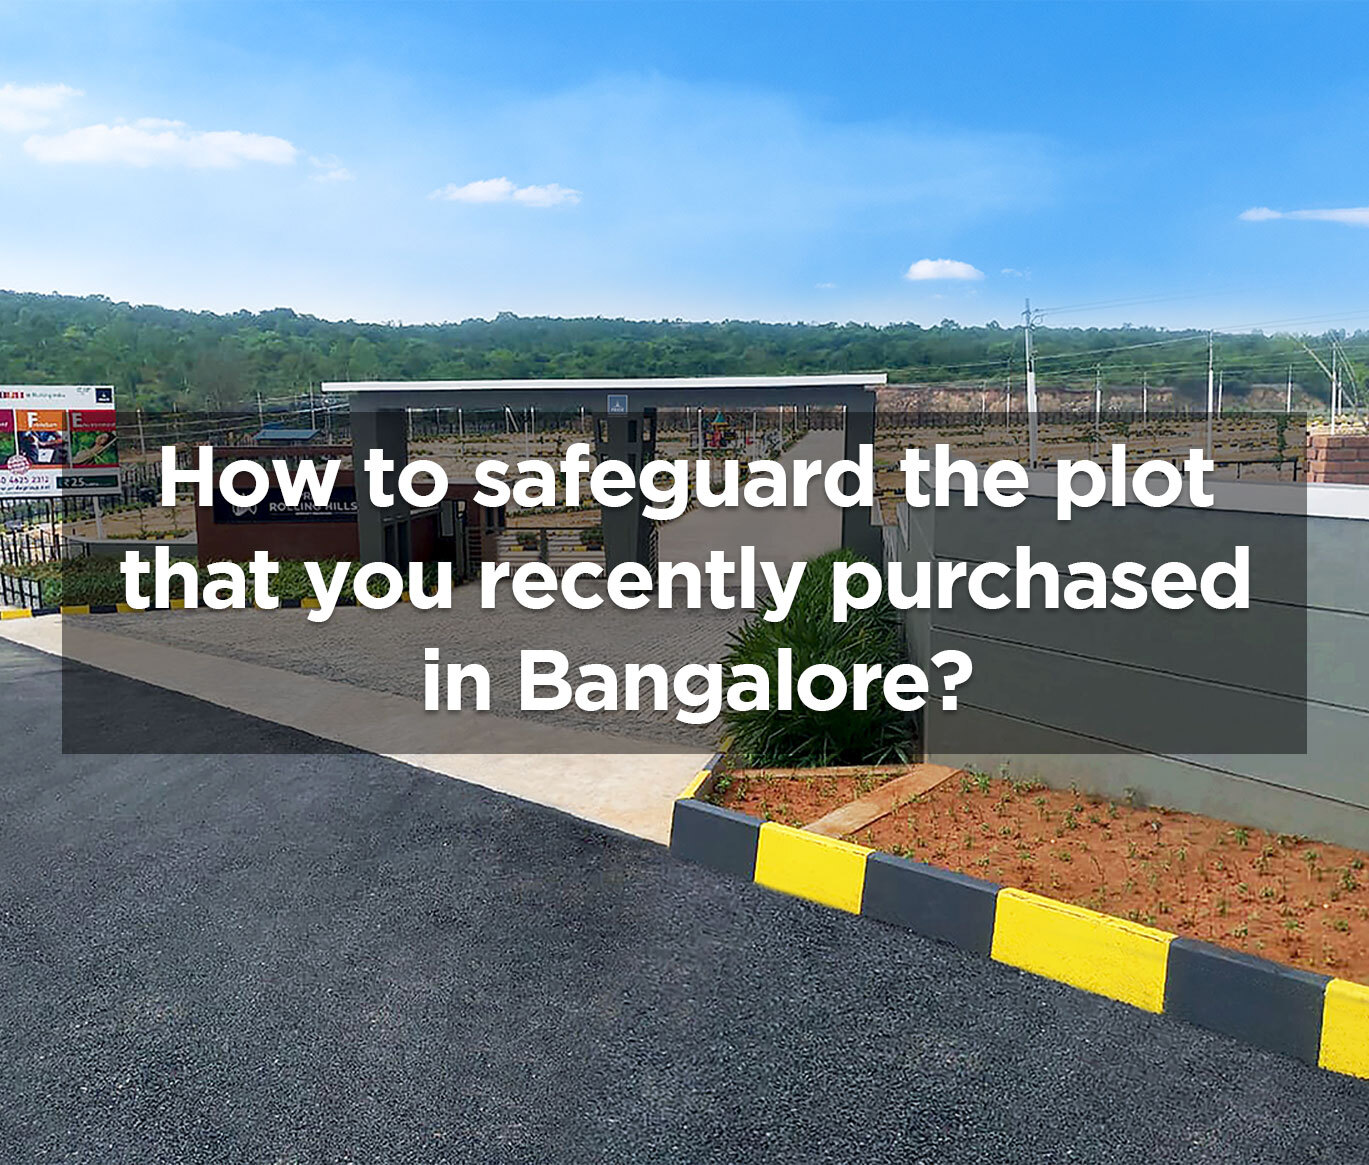 How to safeguard the plot that you recently purchased in Bangalore?